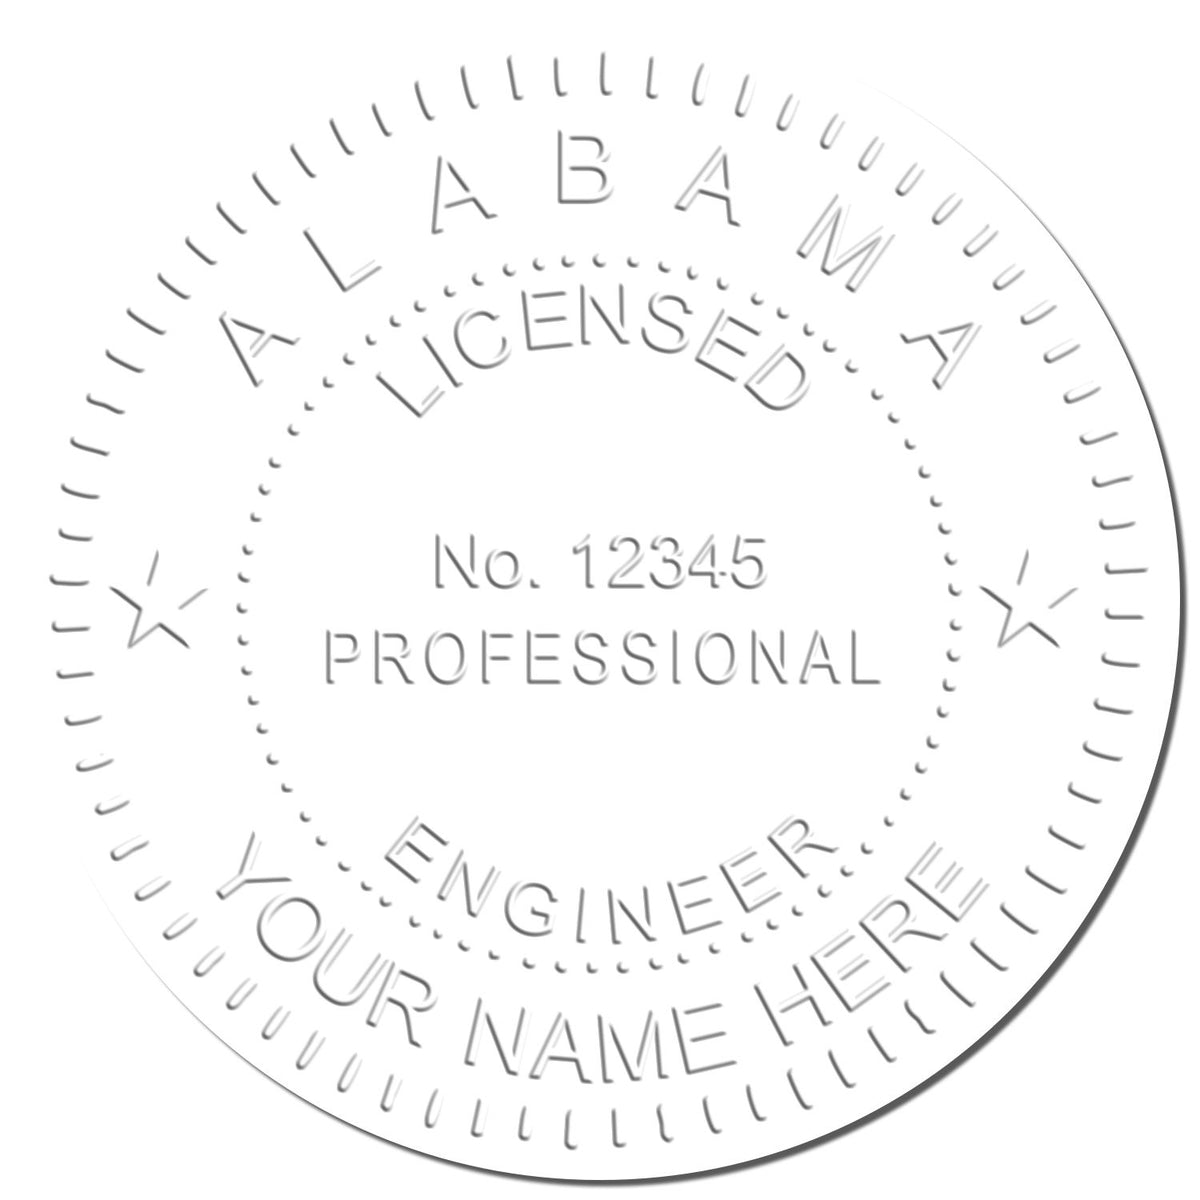 This paper is stamped with a sample imprint of the Gift Alabama Engineer Seal, signifying its quality and reliability.